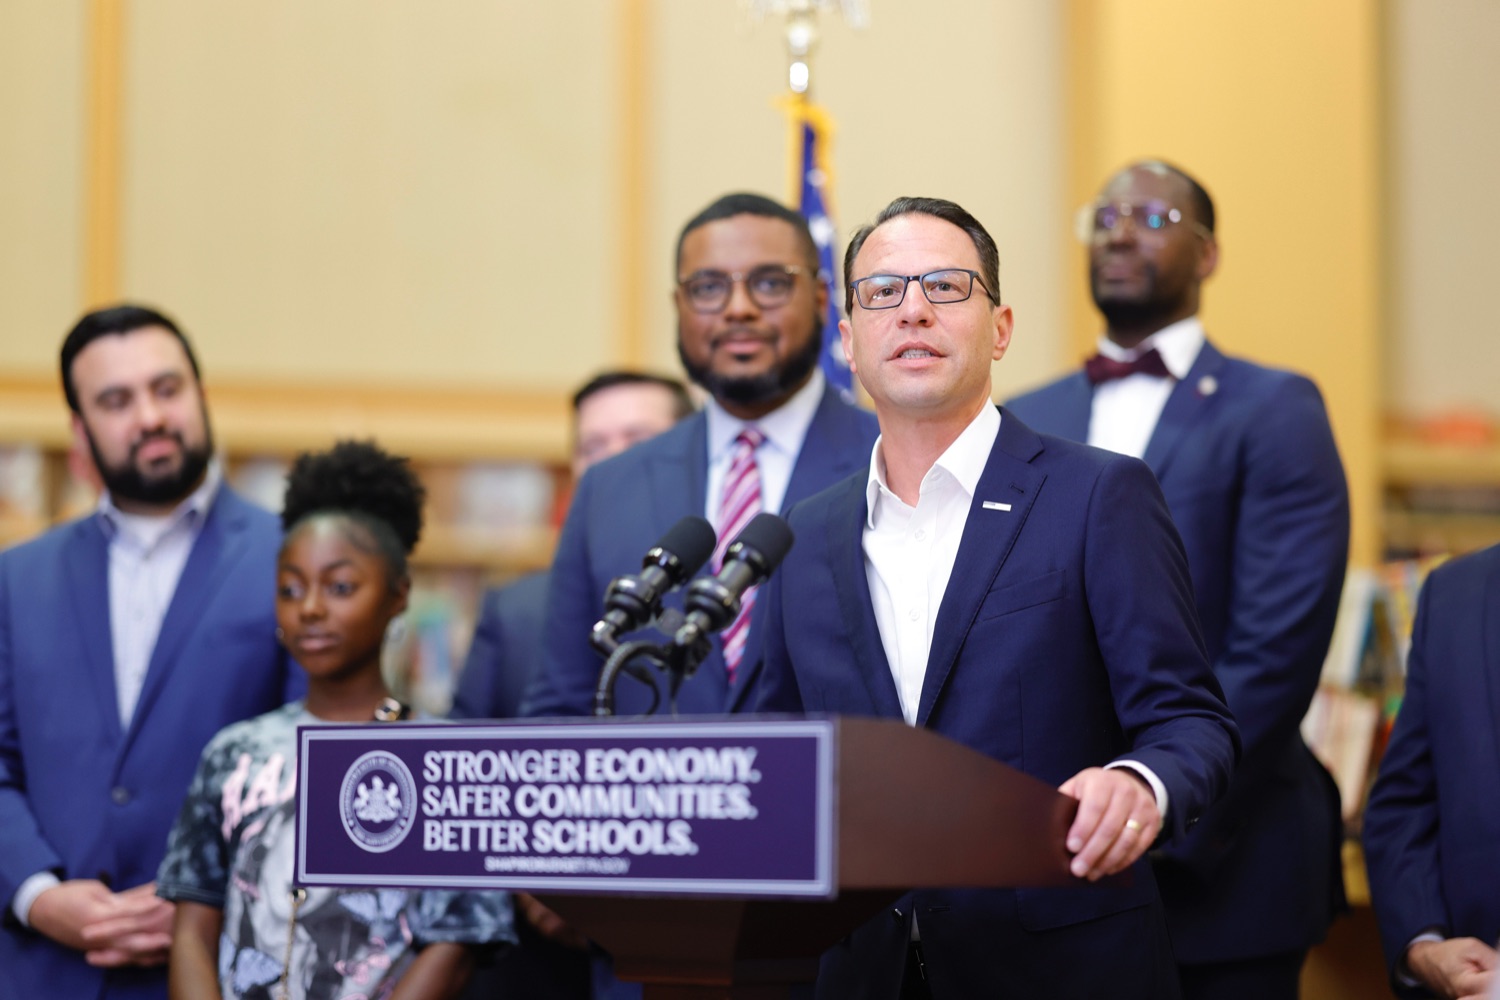 Governor Shapiro Signs Ceremonial Budget Bill Creating Universal Free Breakfast, Making Historic Investments in Public Education During Visit to Allegheny County Elementary School on August 8, 2023.<br><a href="https://filesource.amperwave.net/commonwealthofpa/photo/23563_Gov_Education_DZ_002.JPEG" target="_blank">⇣ Download Photo</a>